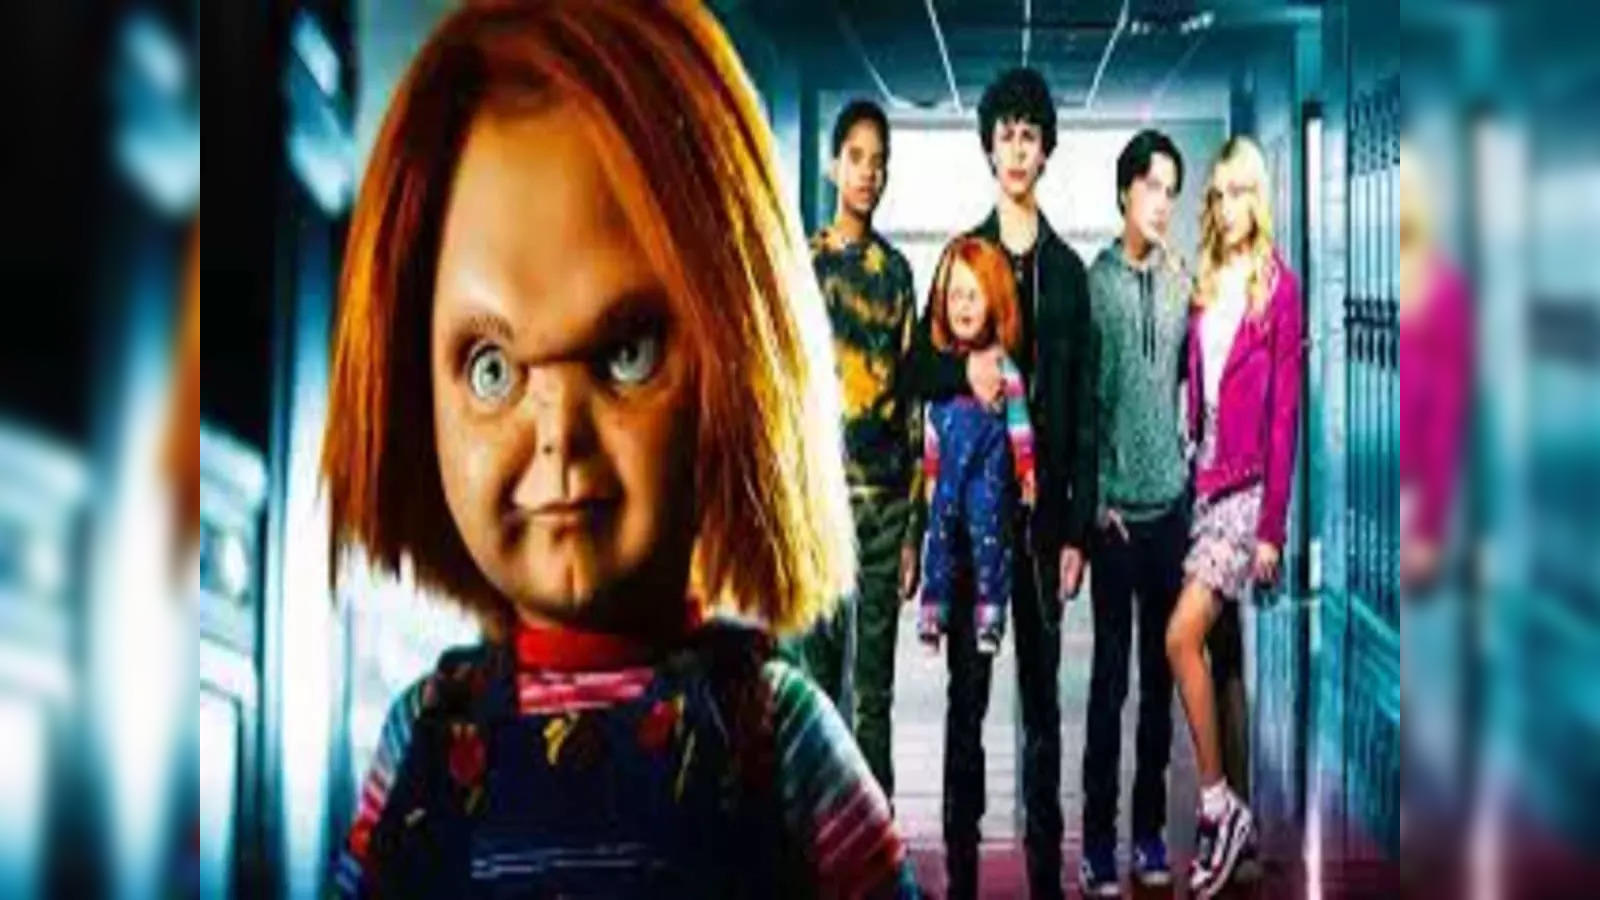 Chucky Season 3 Part 2: Chucky Season 3 Part 2: Here's all you may want to  know about release date, cast, plot and more - The Economic Times